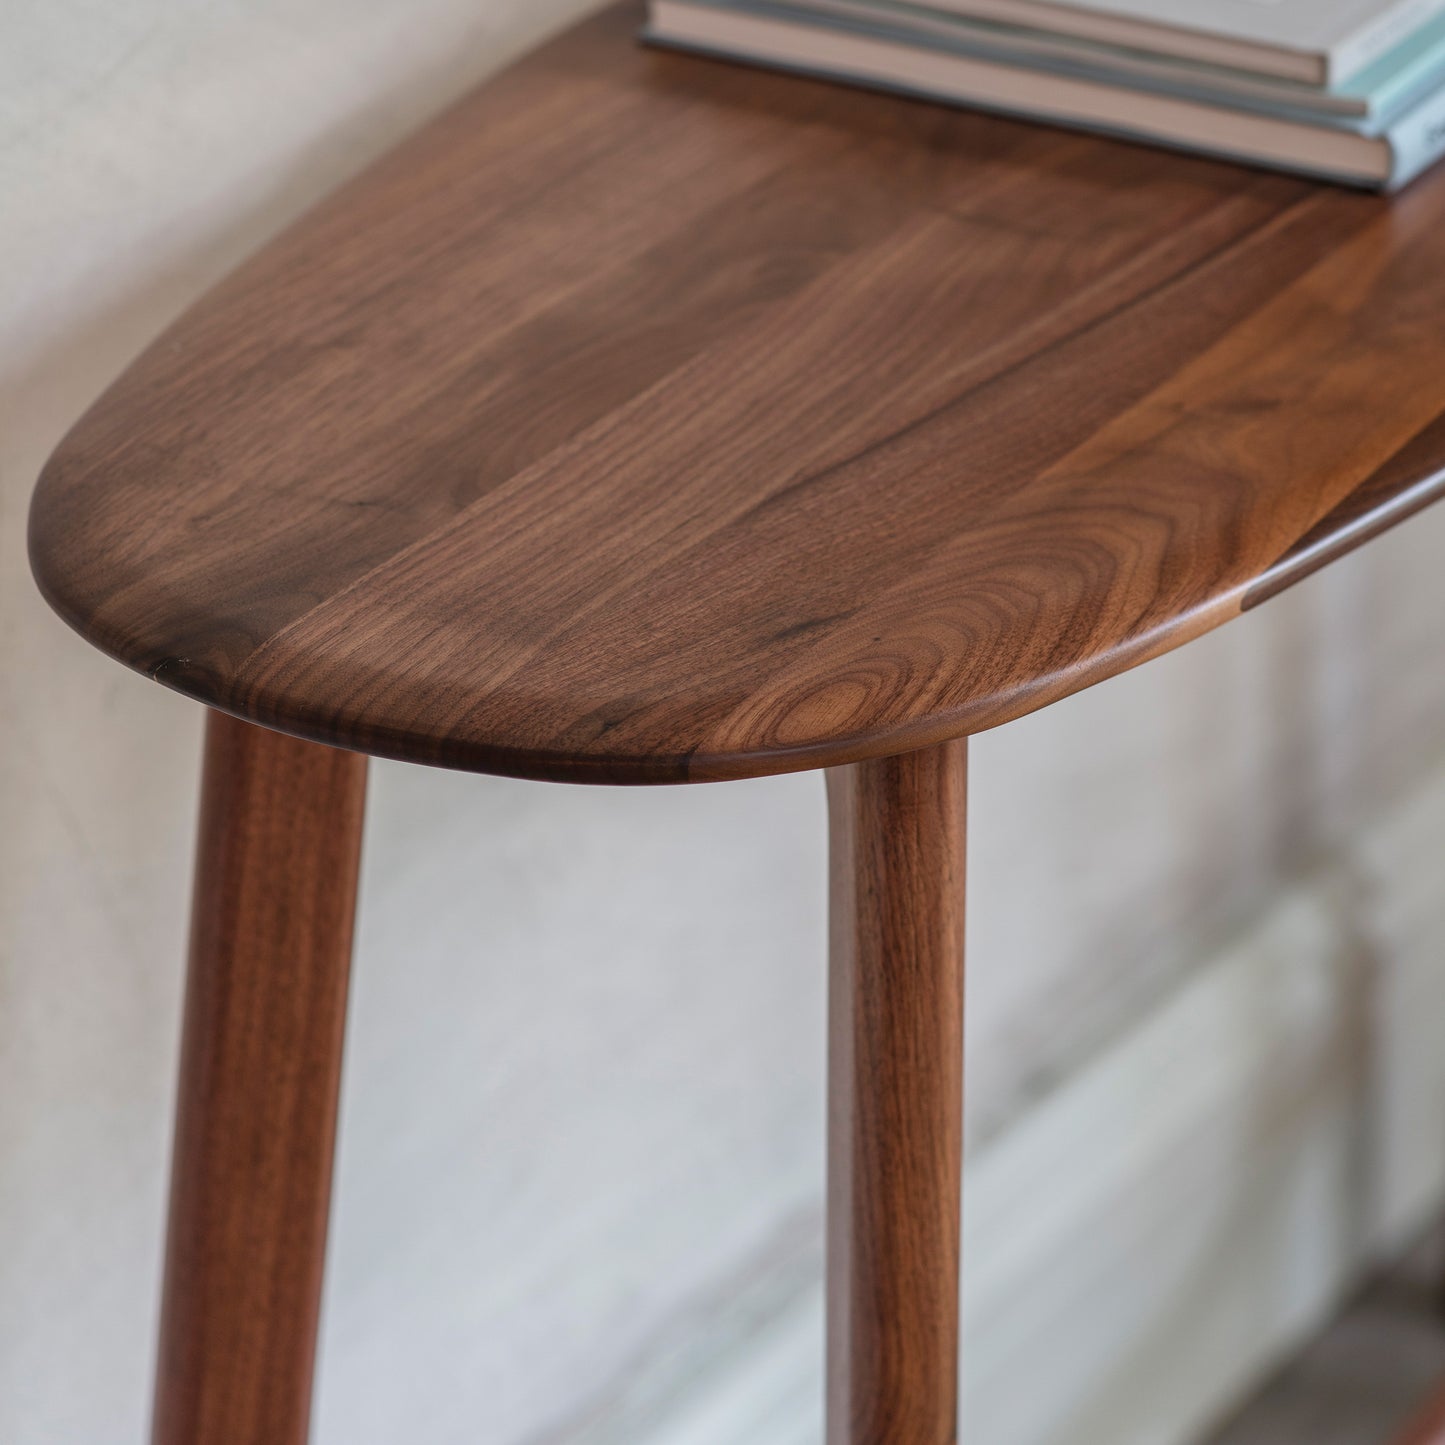 A Walnut Home Furniture Console Table with a book on it.